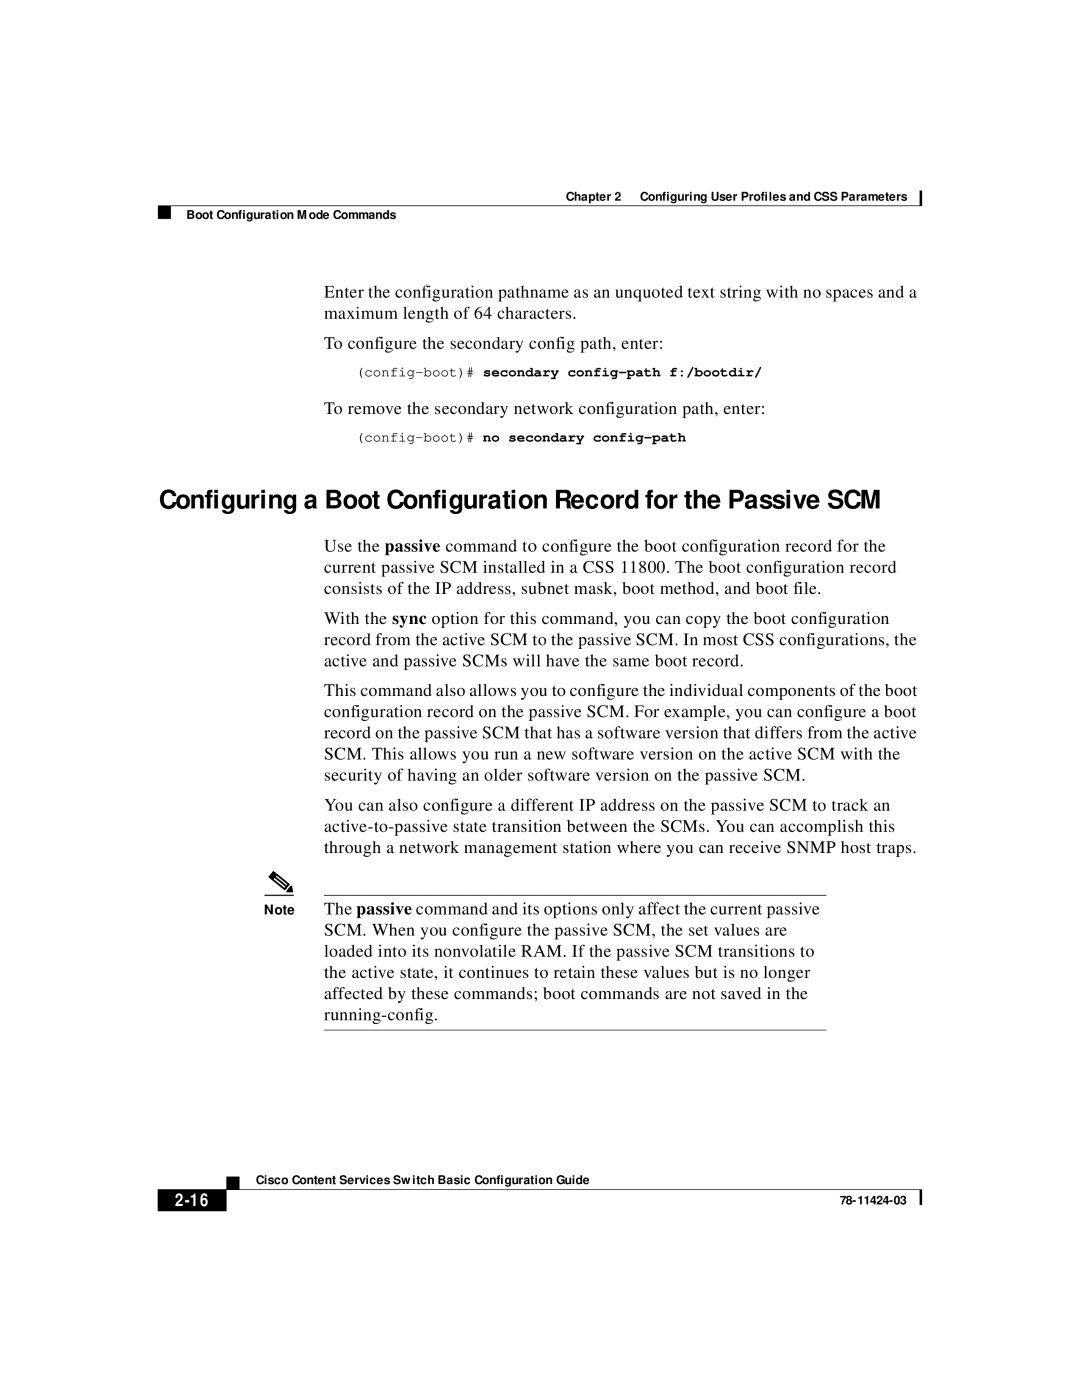 Cisco Systems 78-11424-03 manual 2-16, Configuring a Boot Configuration Record for the Passive SCM 